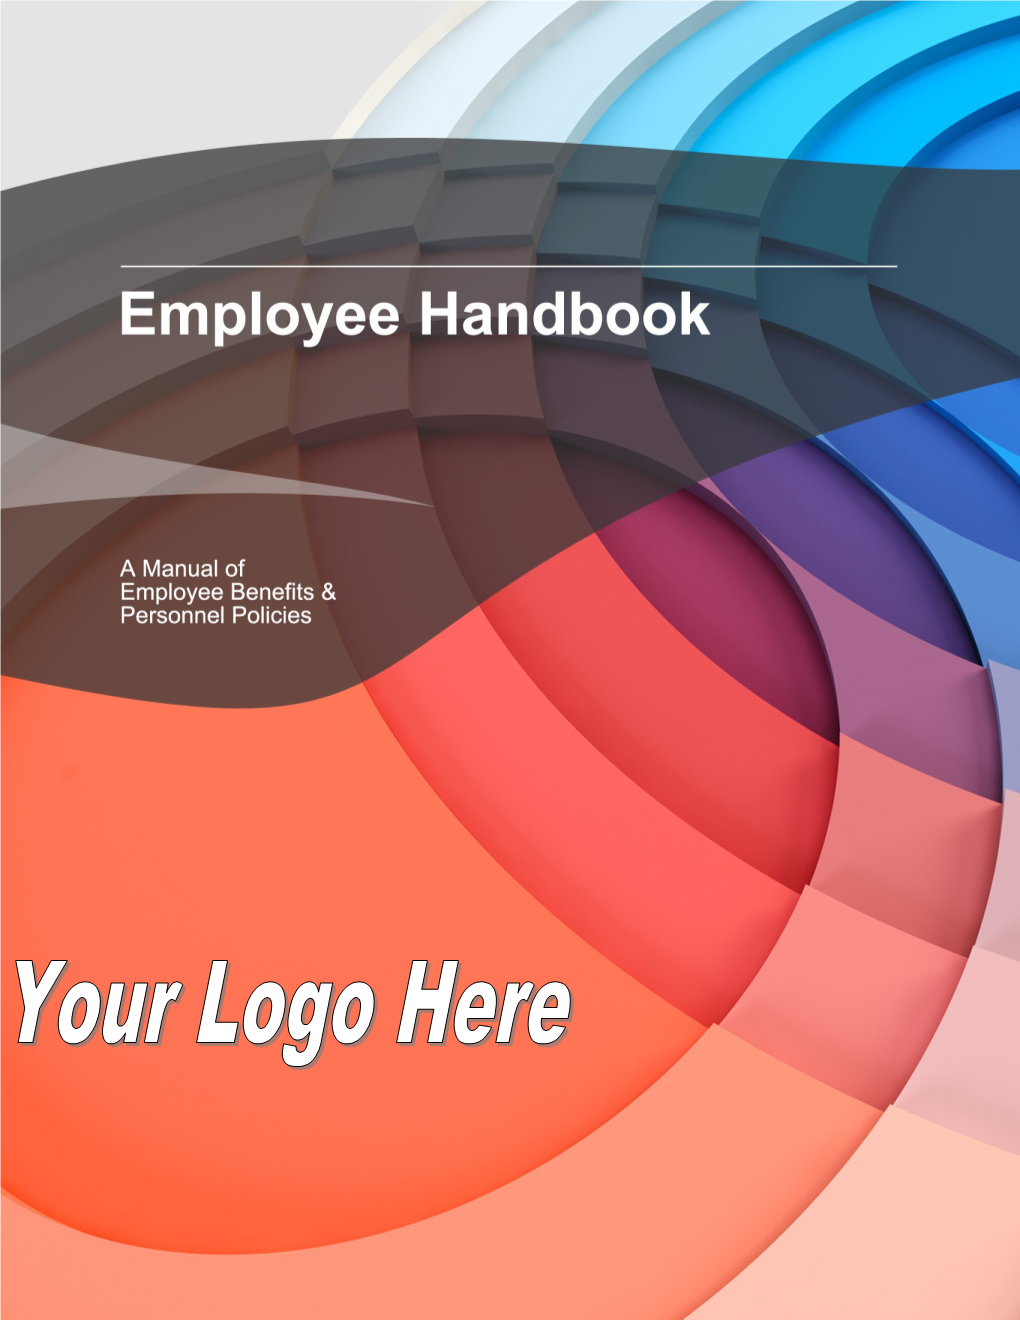 Employee Handbook: Confidential Information and Company Property